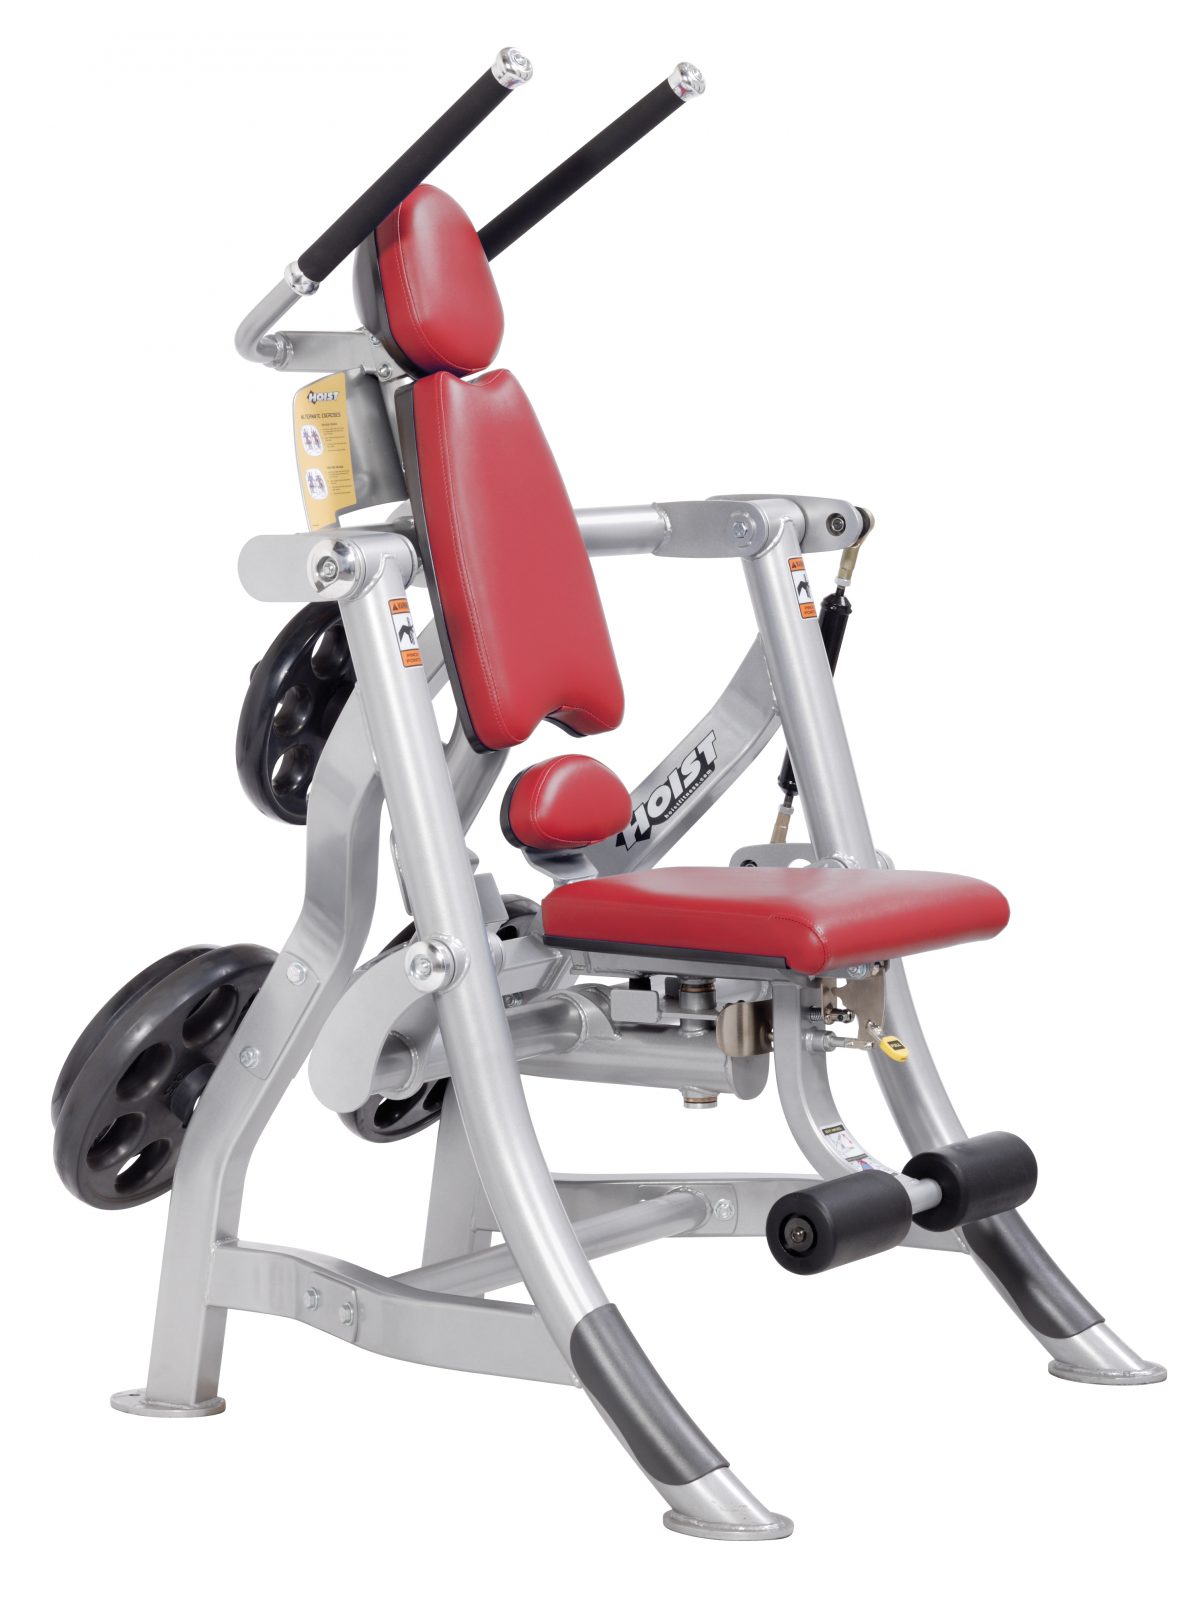 A weight machine with a red seat on a white background